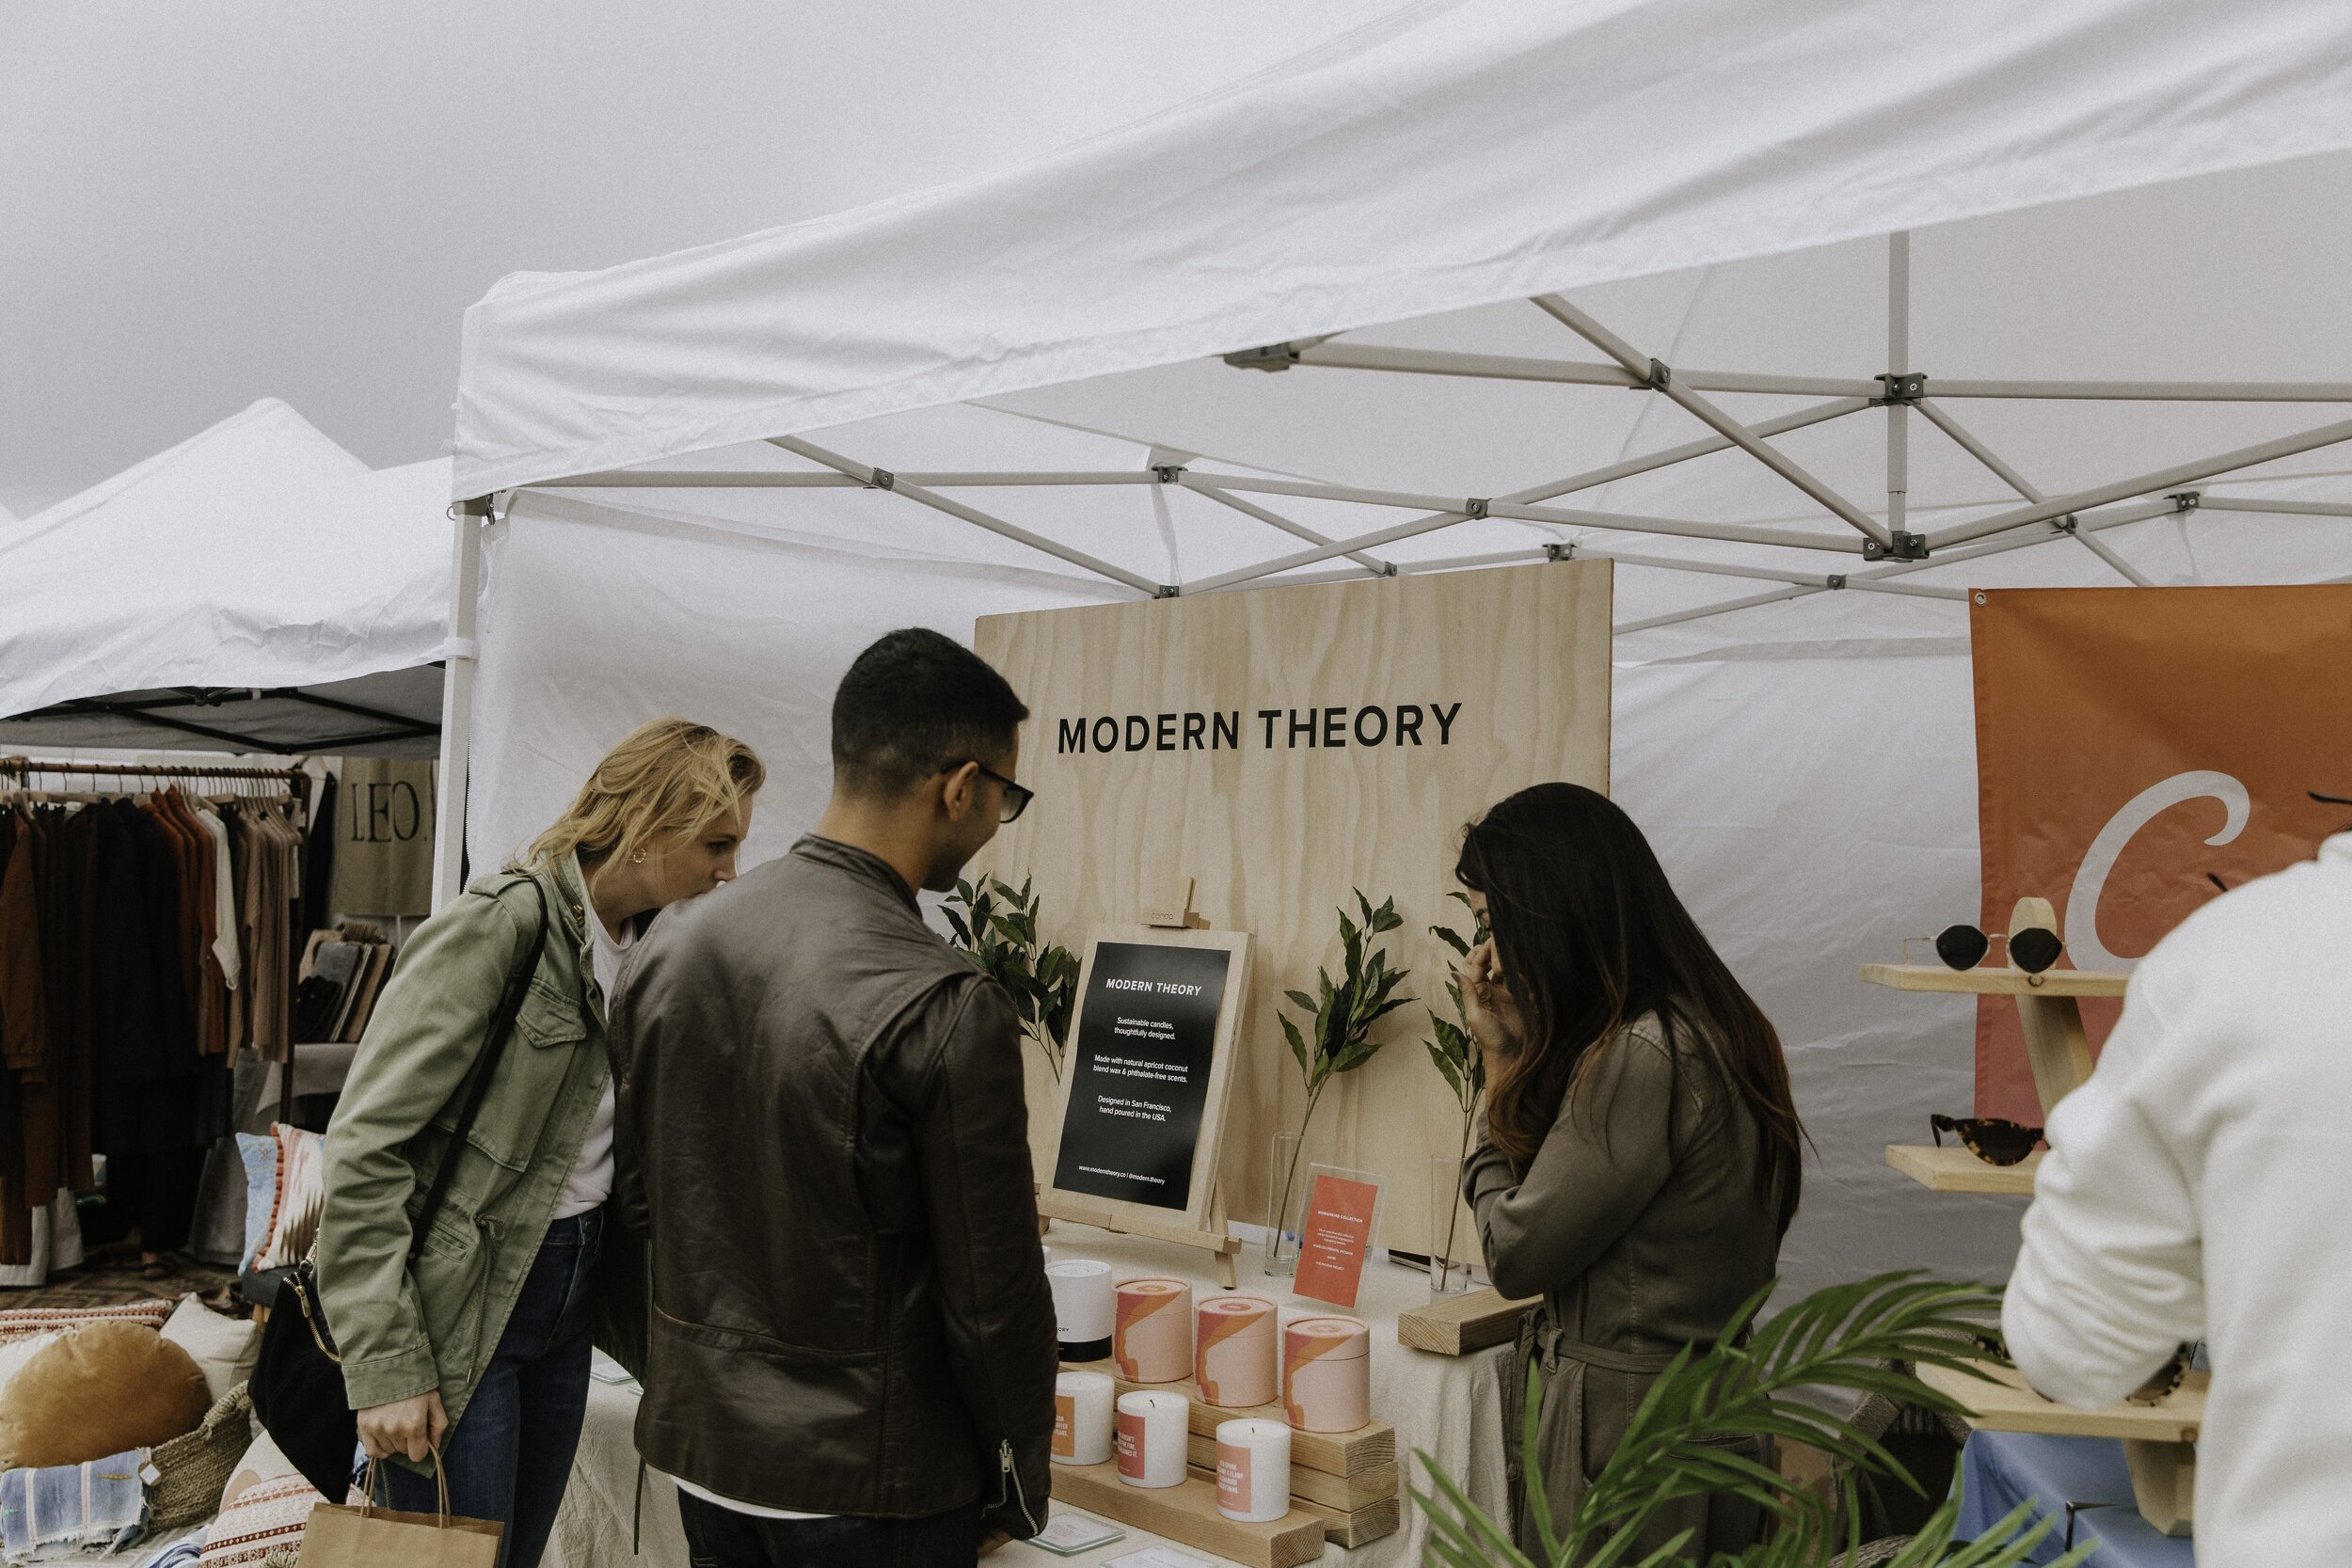 Modern Theory at Head West Marketplace